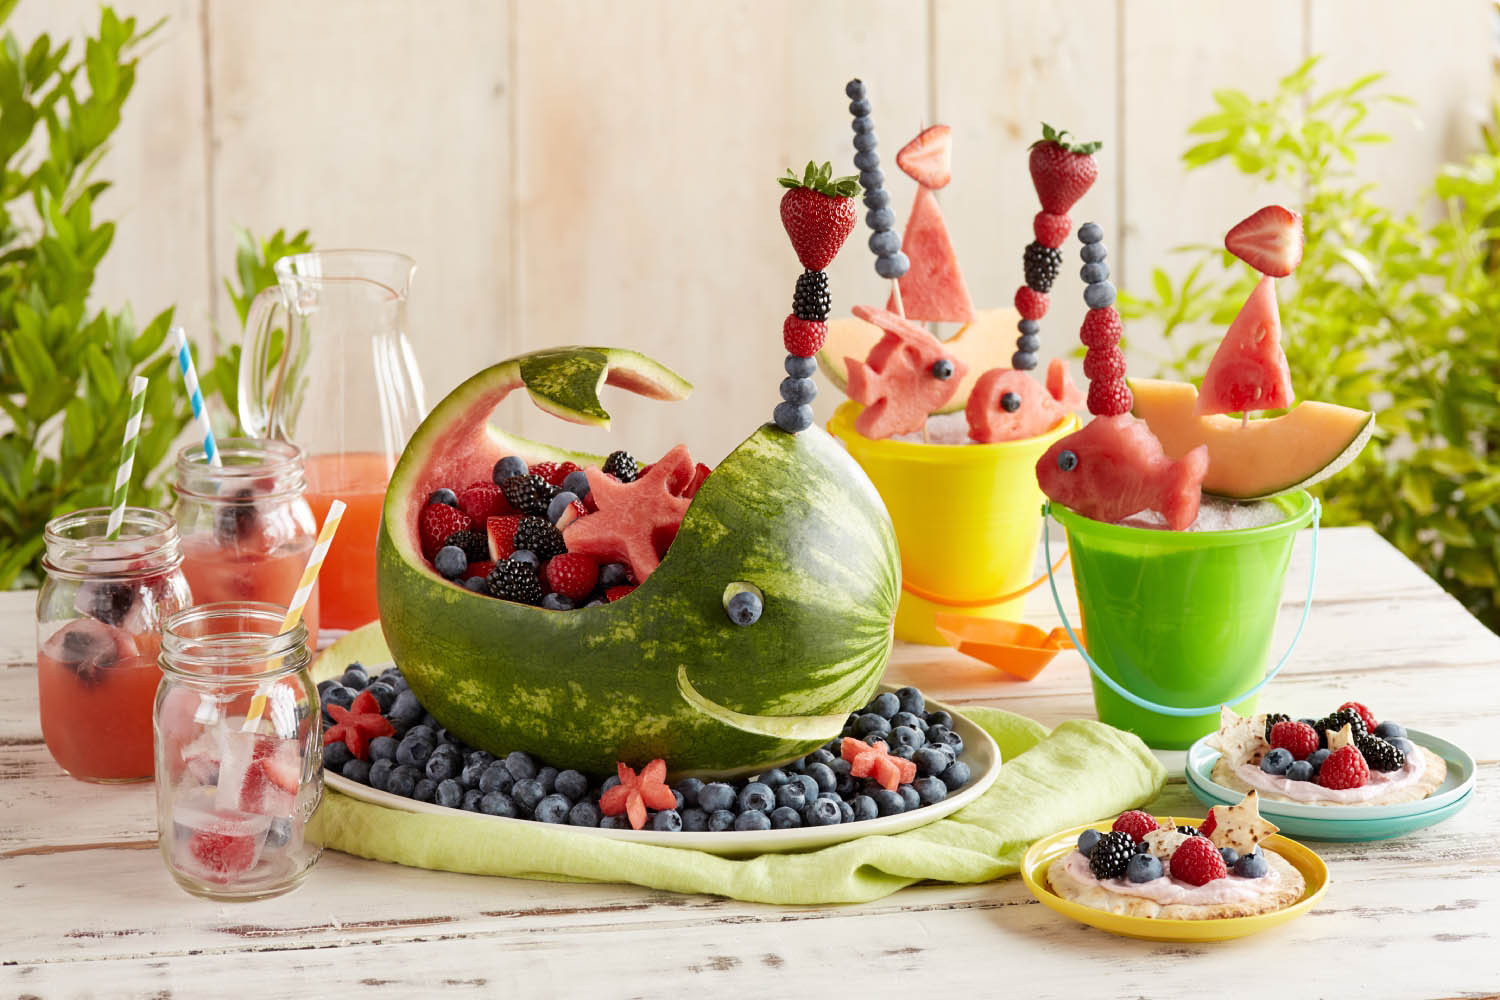 Beach Party Food Ideas Kids
 Splash into Summer with a Berry Beach Party